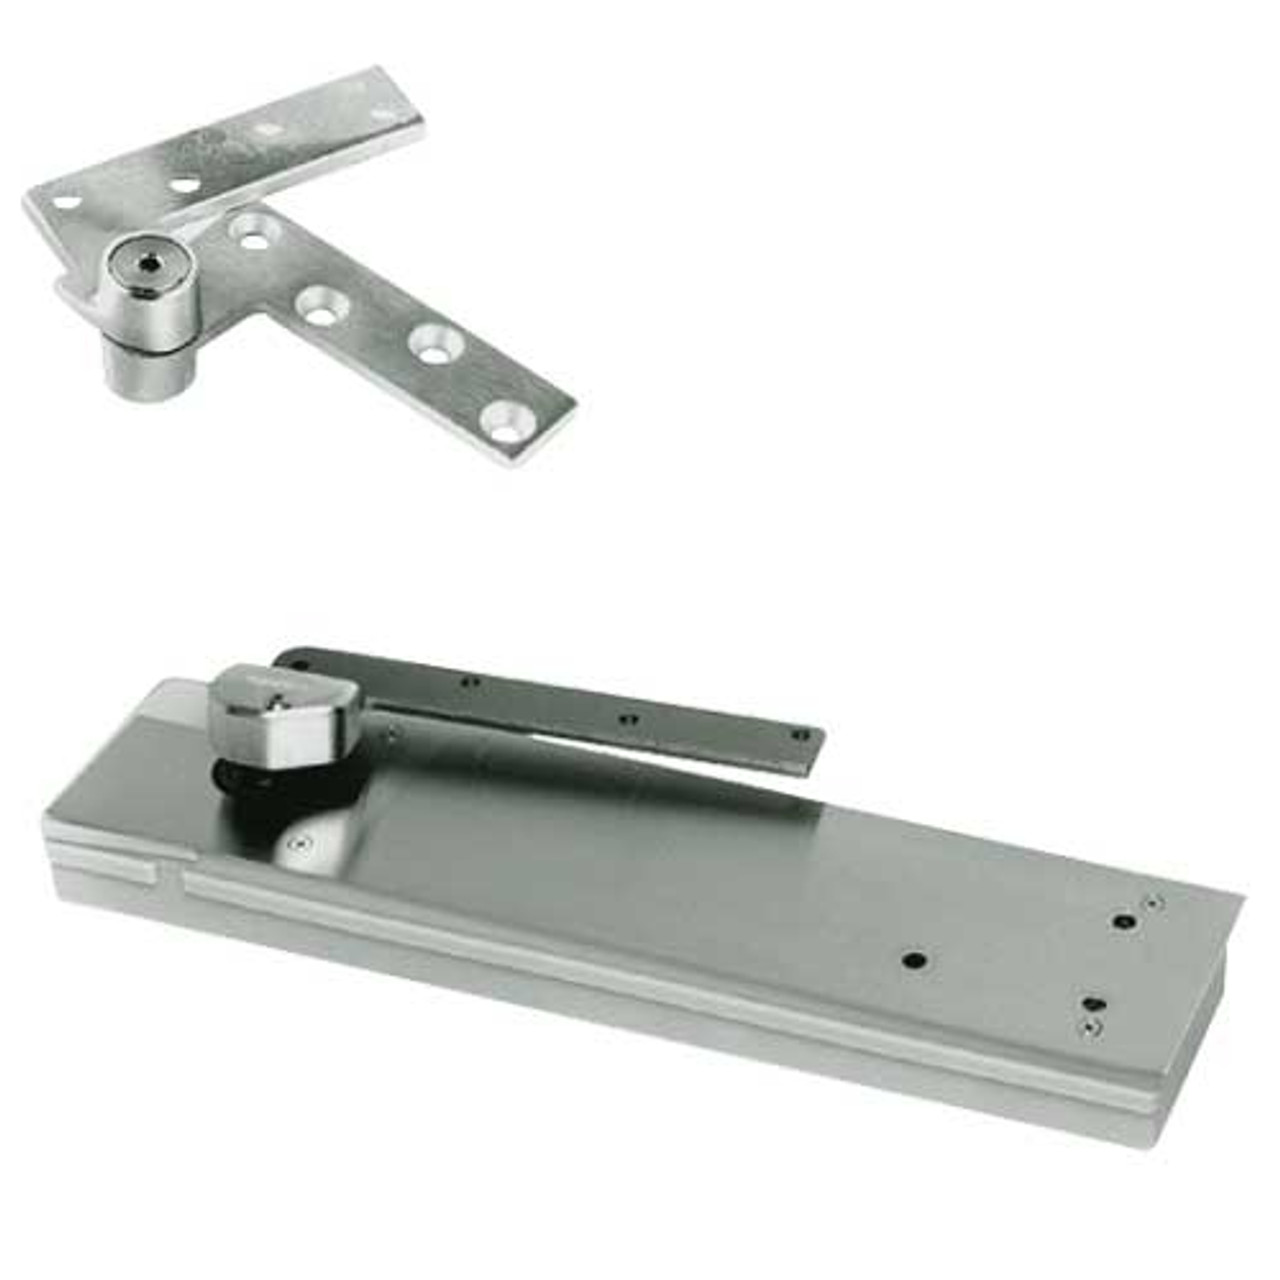 5105ABC90-1-1/2OS-SC-LH-619 Rixson 51 Series 1-1/2" Offset Hung Shallow Depth Floor Closers in Satin Nickel Finish